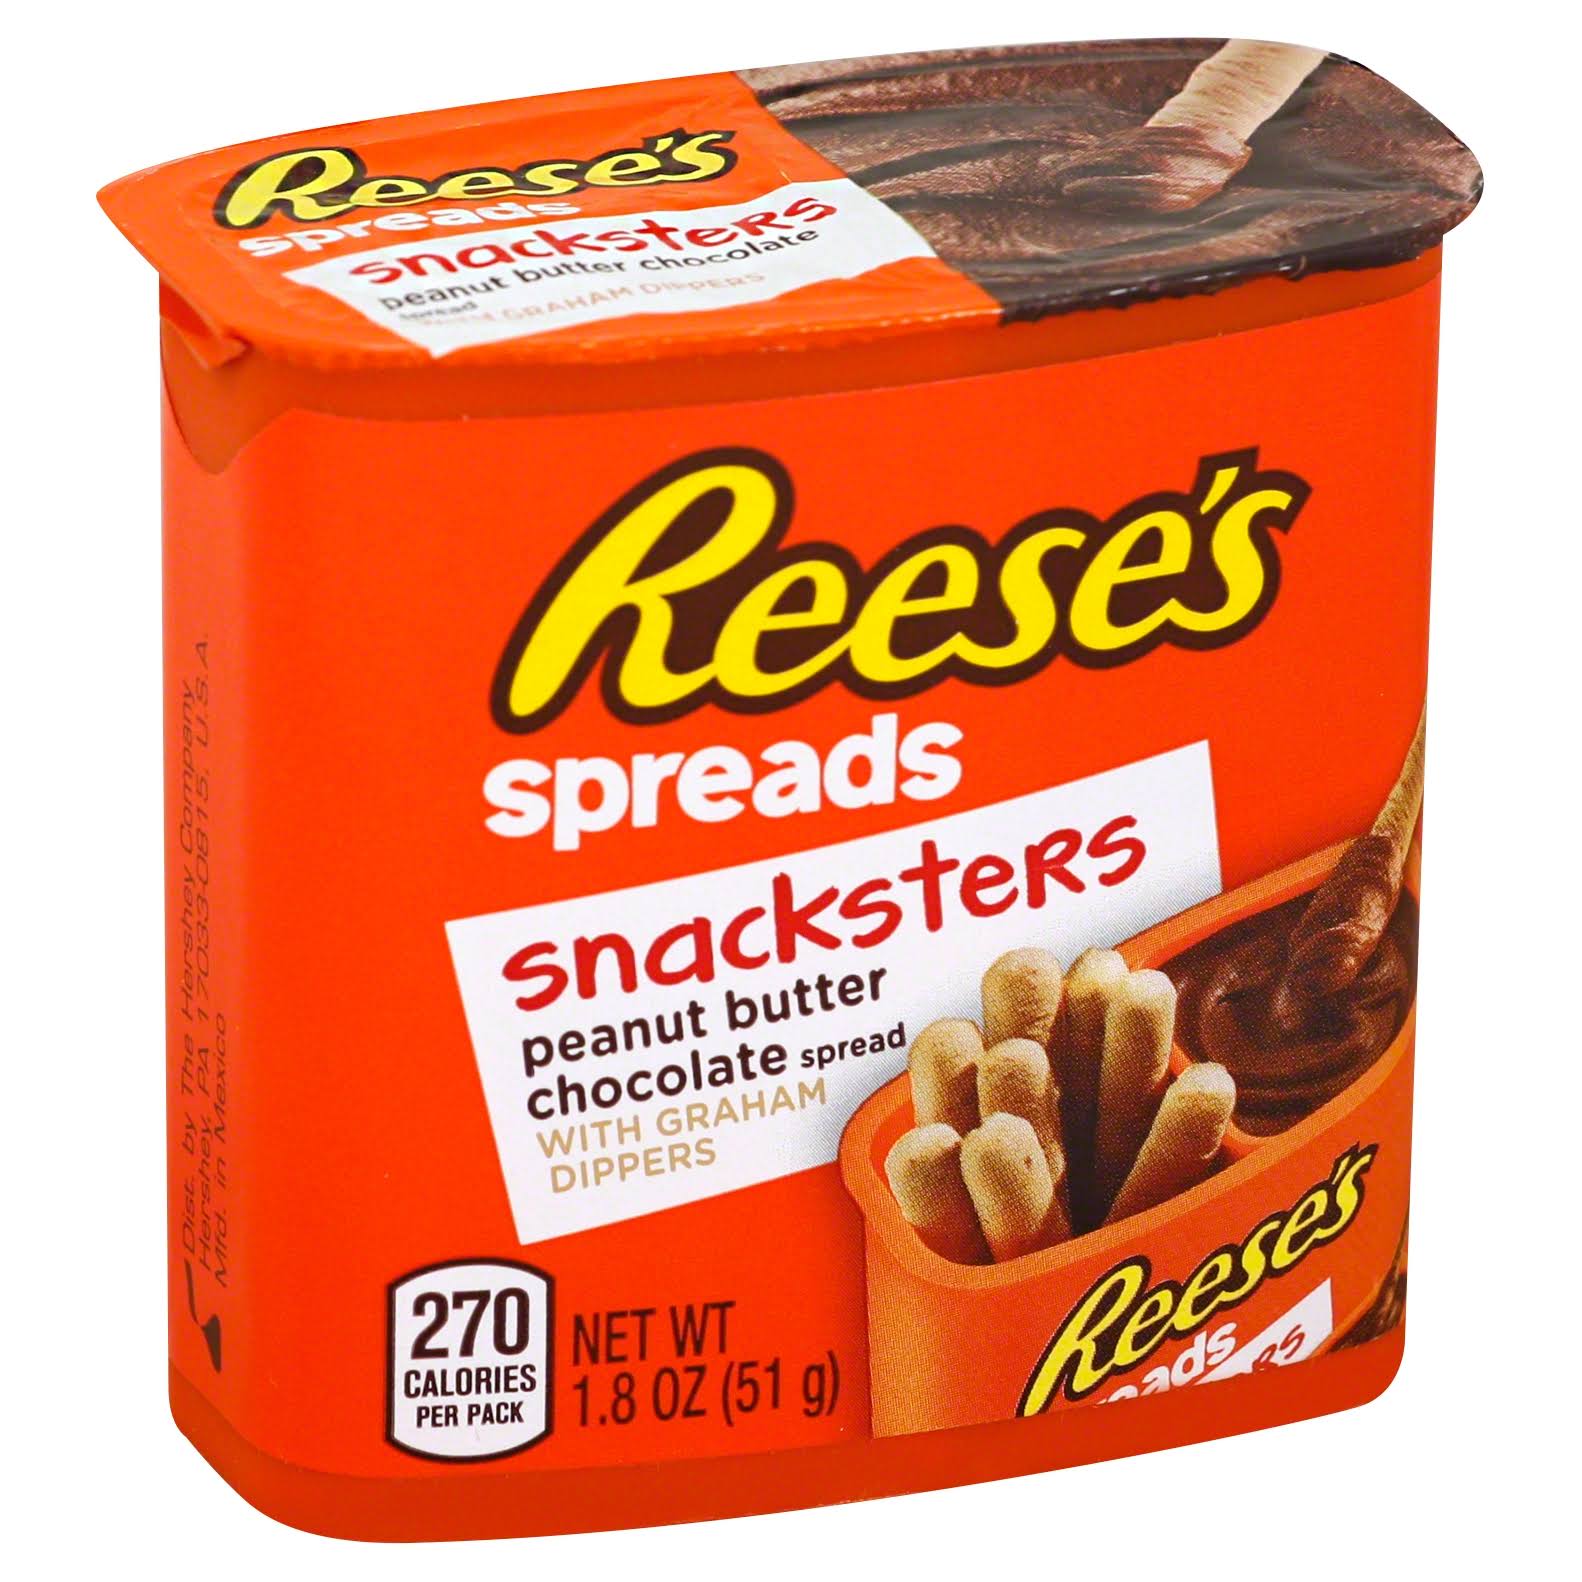 Hershey's Reese's Peanut Butter Snackster - 1.8Oz